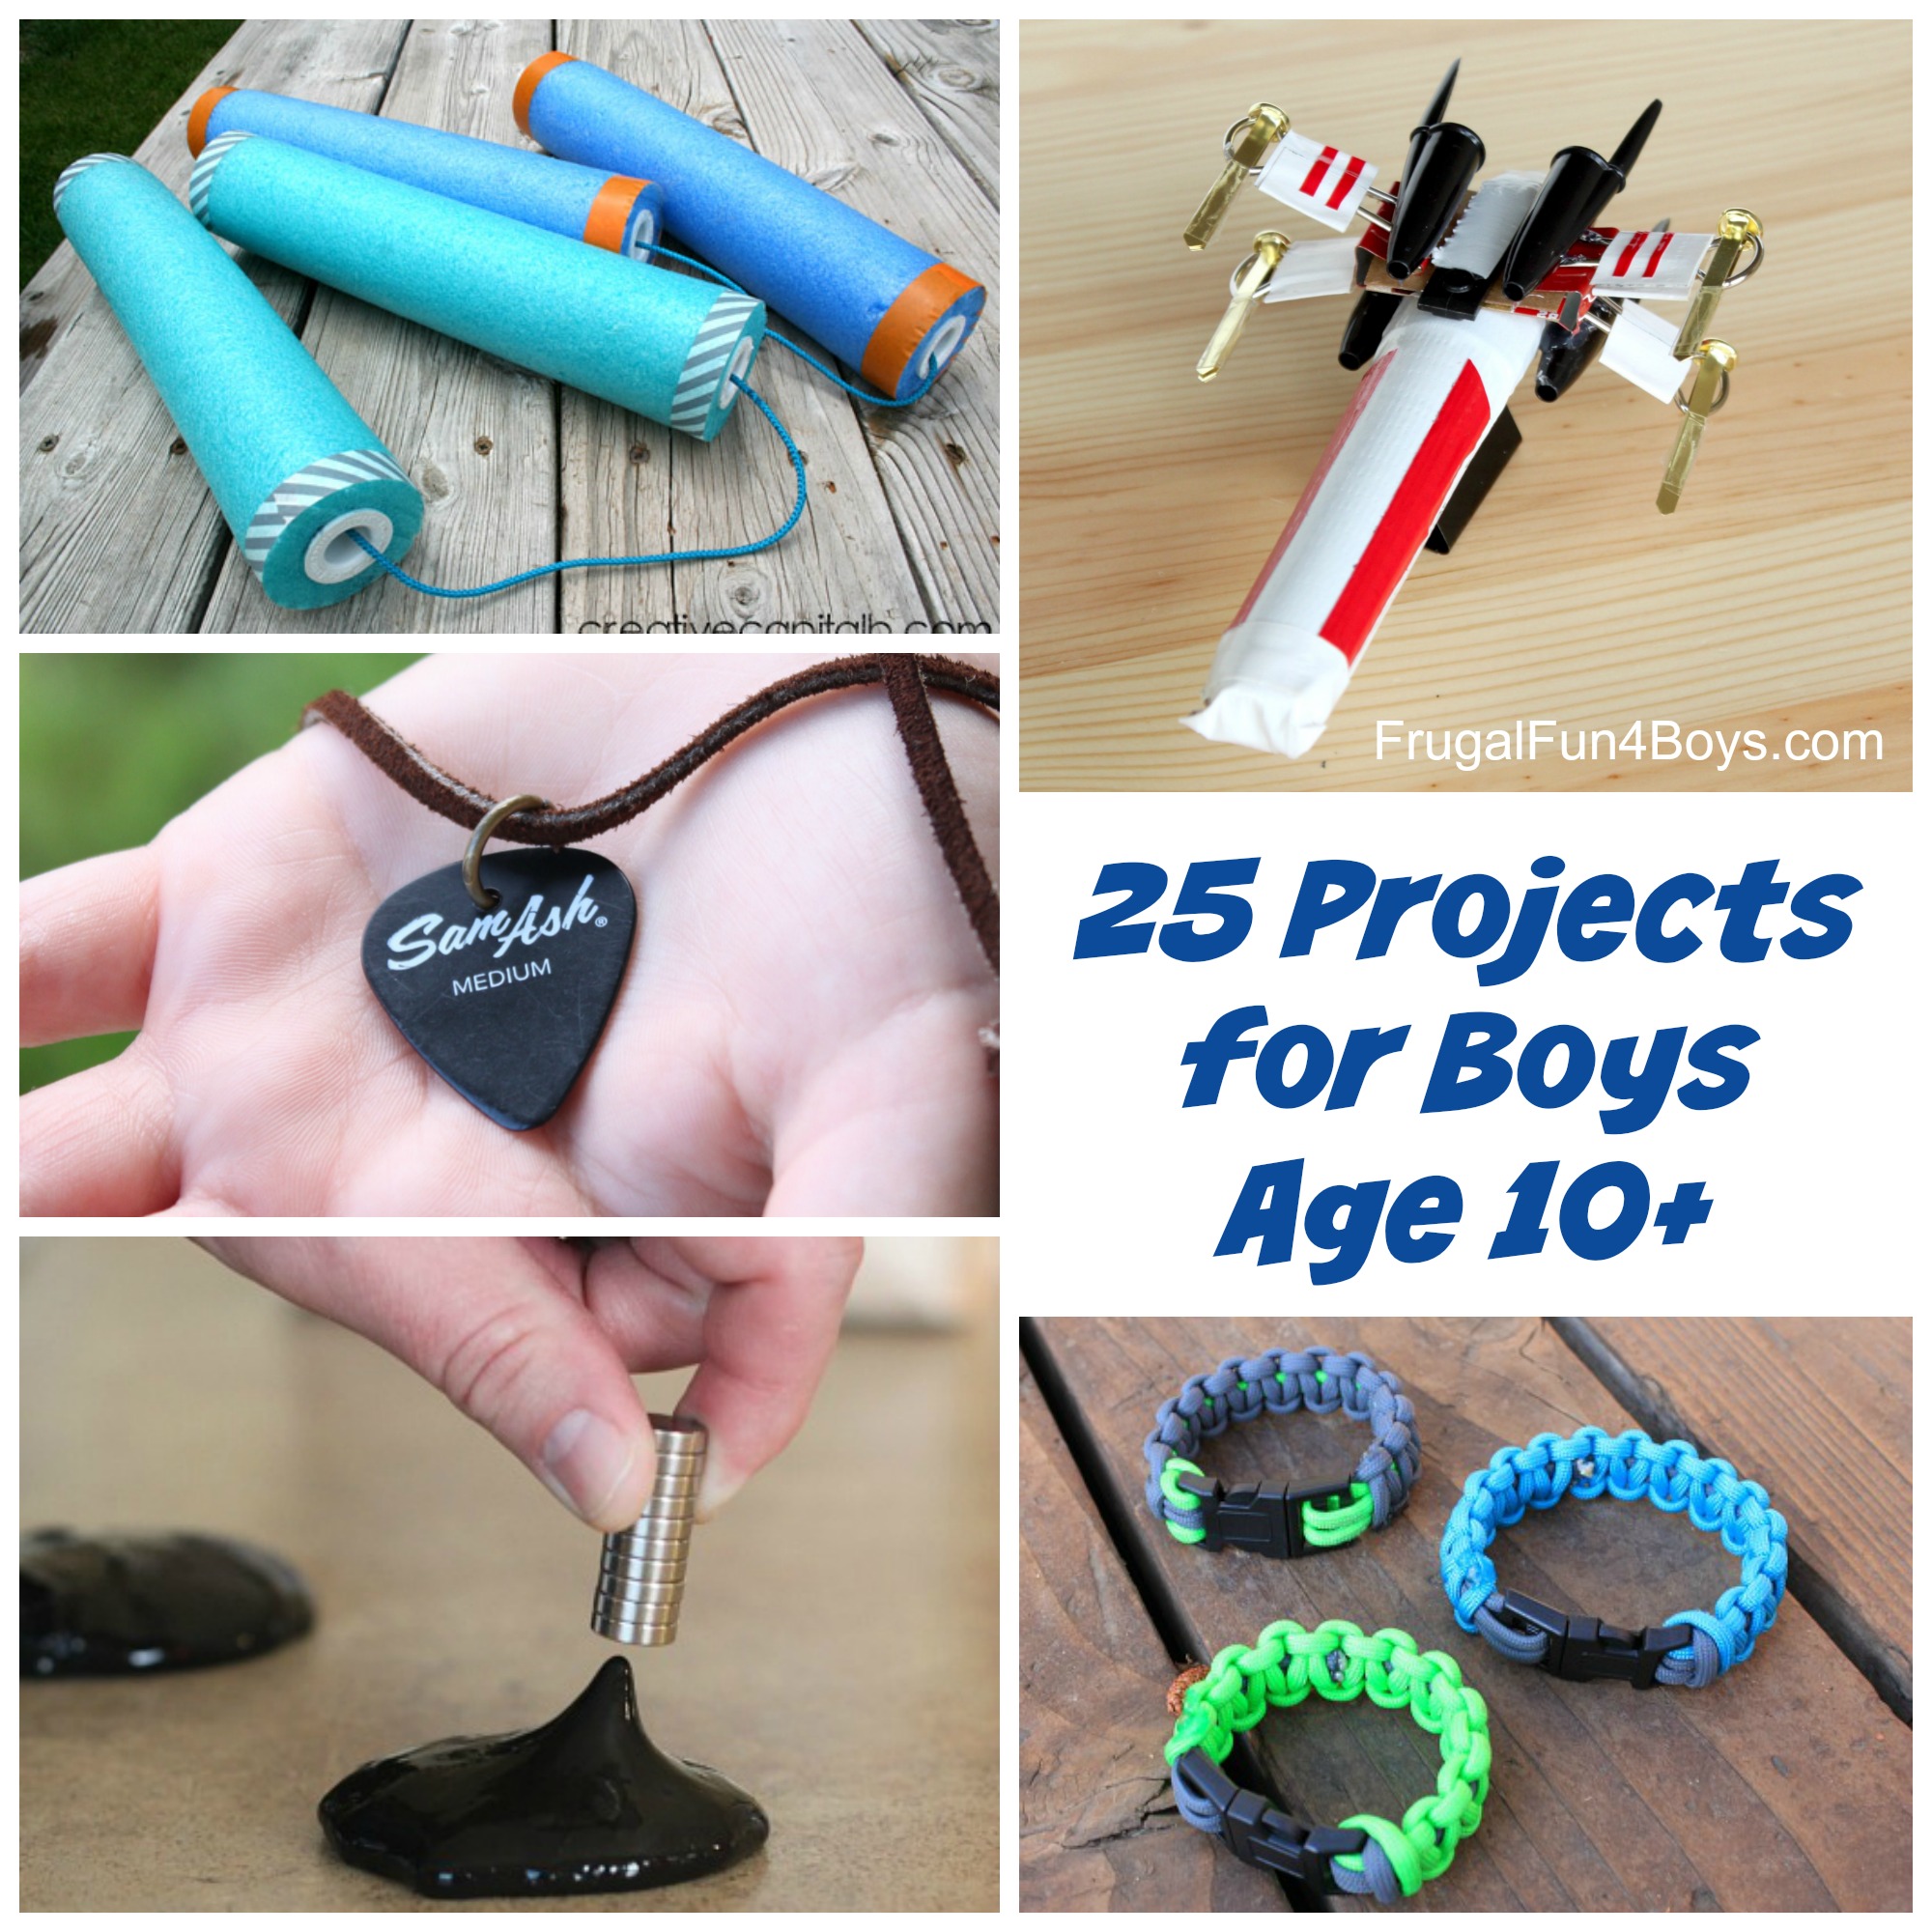 25 Awesome Projects for Tween and Teen Boys (Ages 10 and Up)